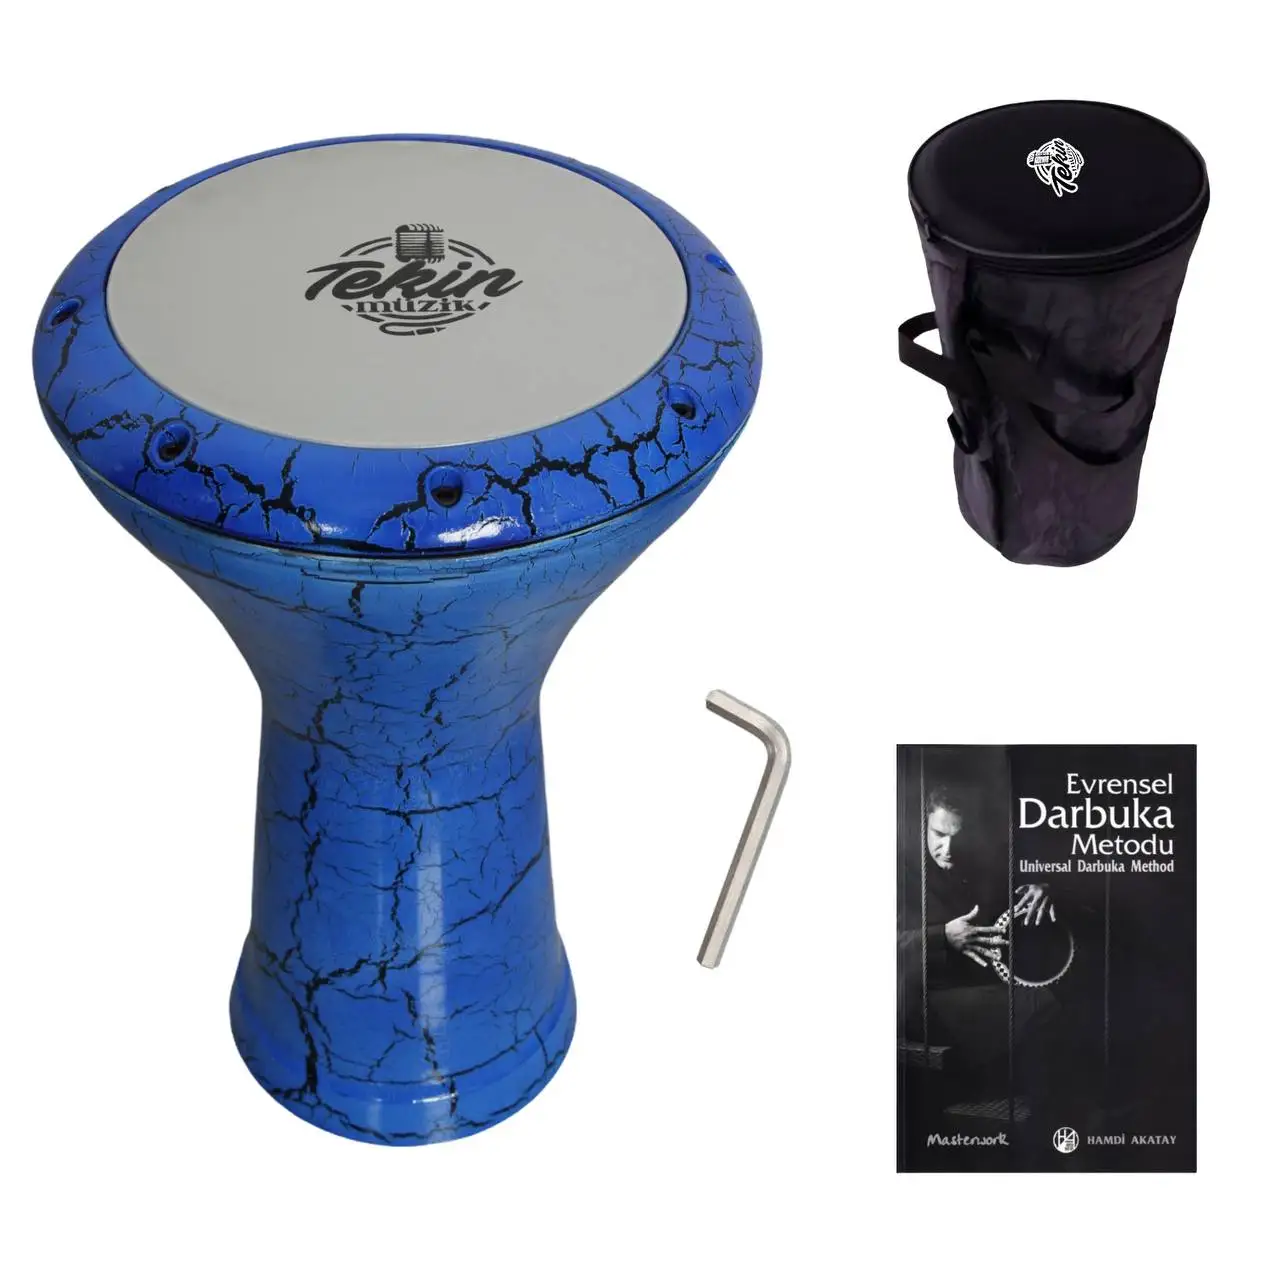 Darbuka Tomtom Goblet with Case and Learning Guide Drum Doumbek Tombak Arabic Tabla Taborine Tabor Darabukka Percussion Musical enlarge